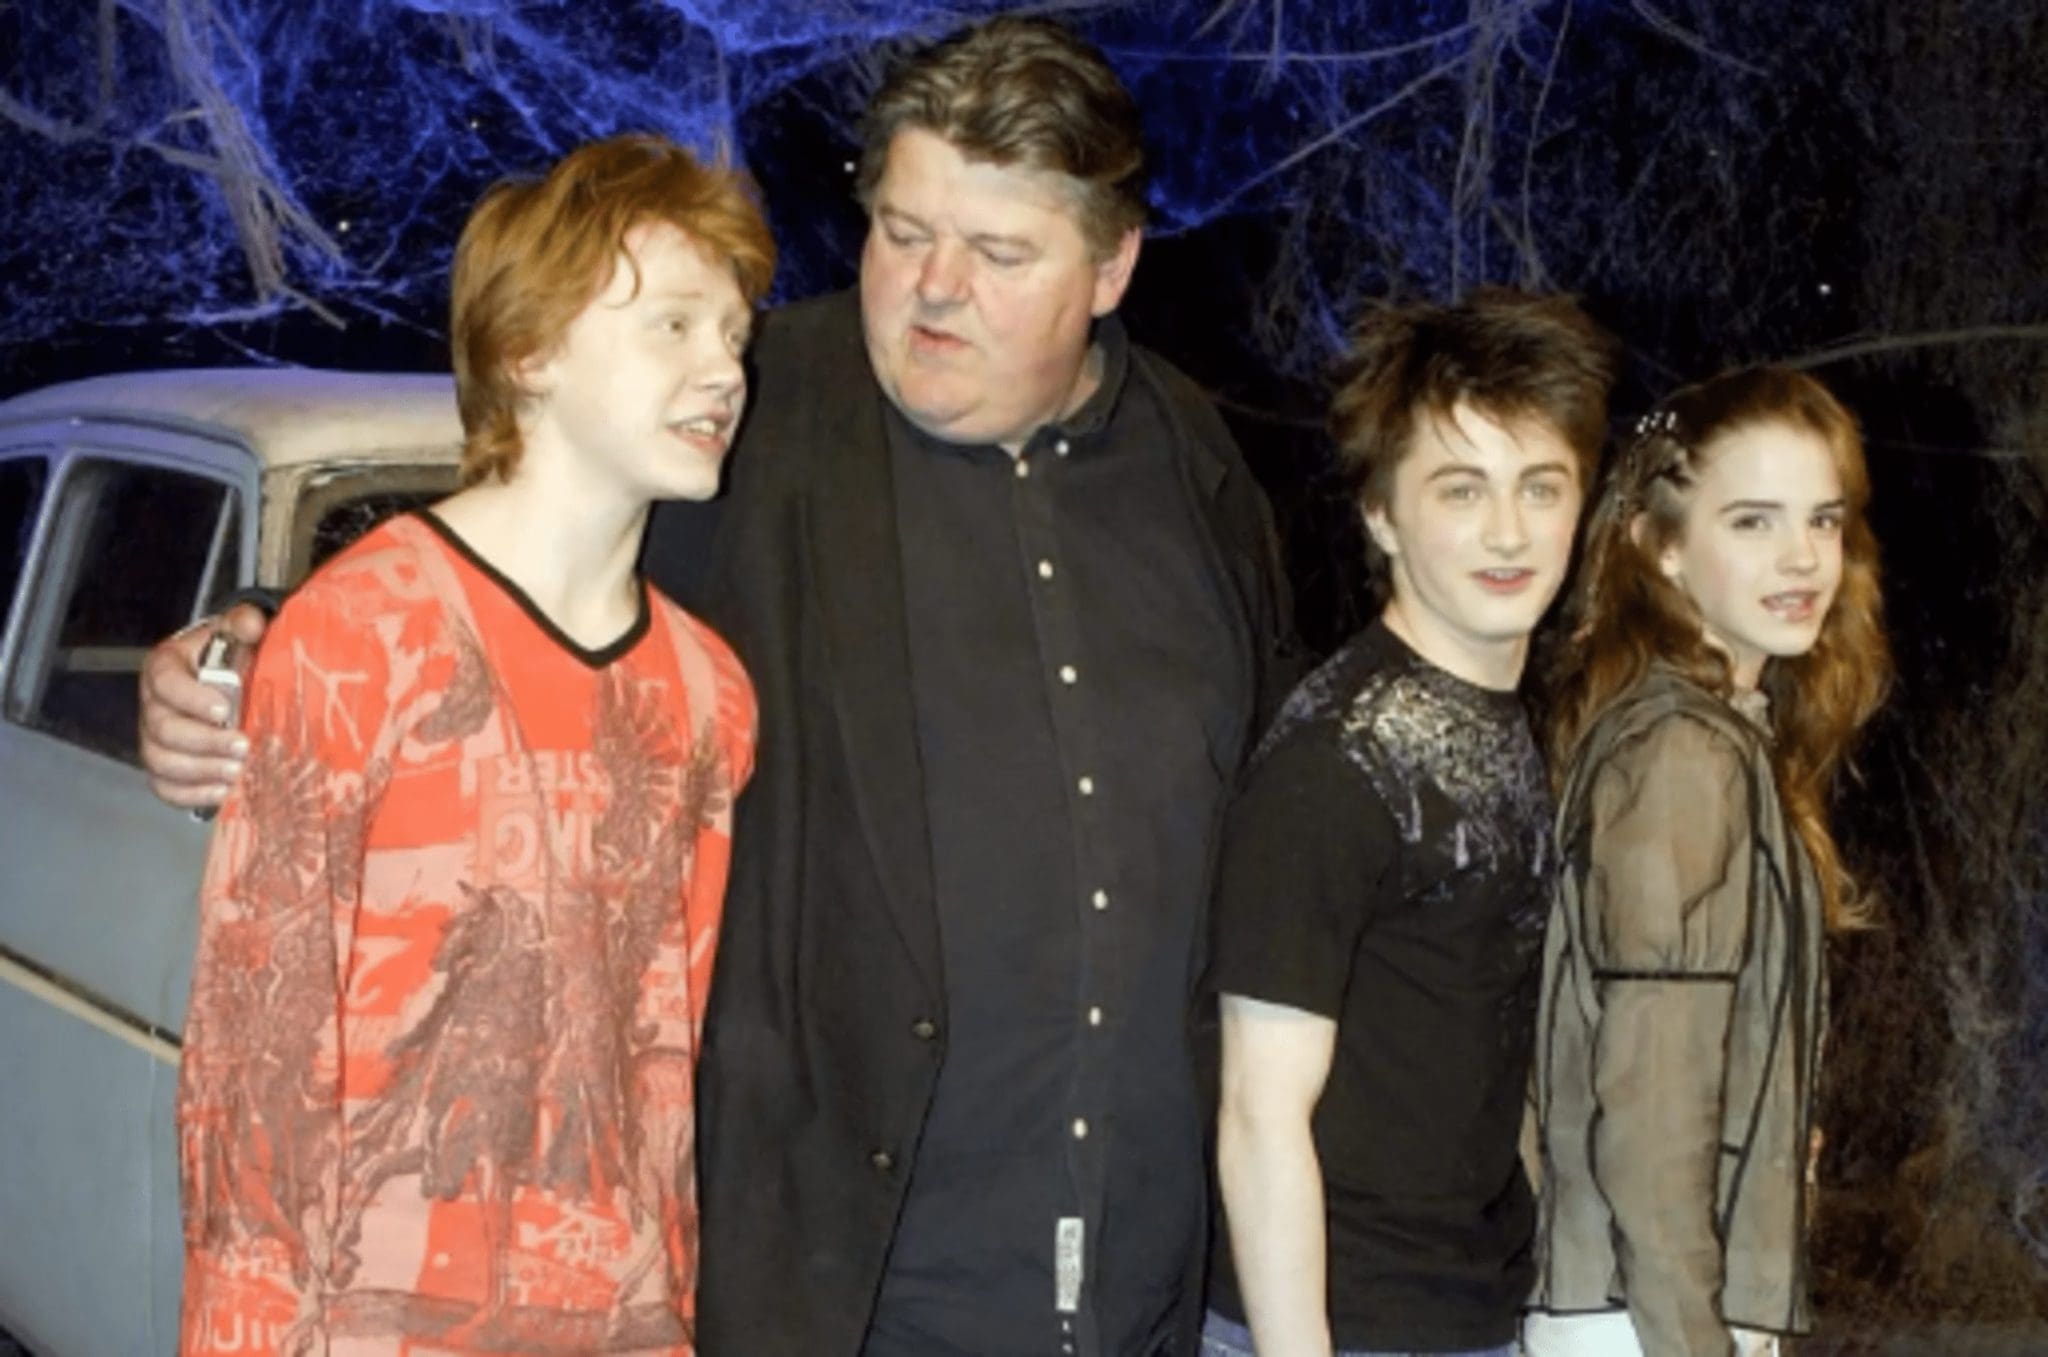 The Late "Harry Potter" Co-Star Robbie Coltrane Has Been Remembered By His Co-Star, Emma Watson